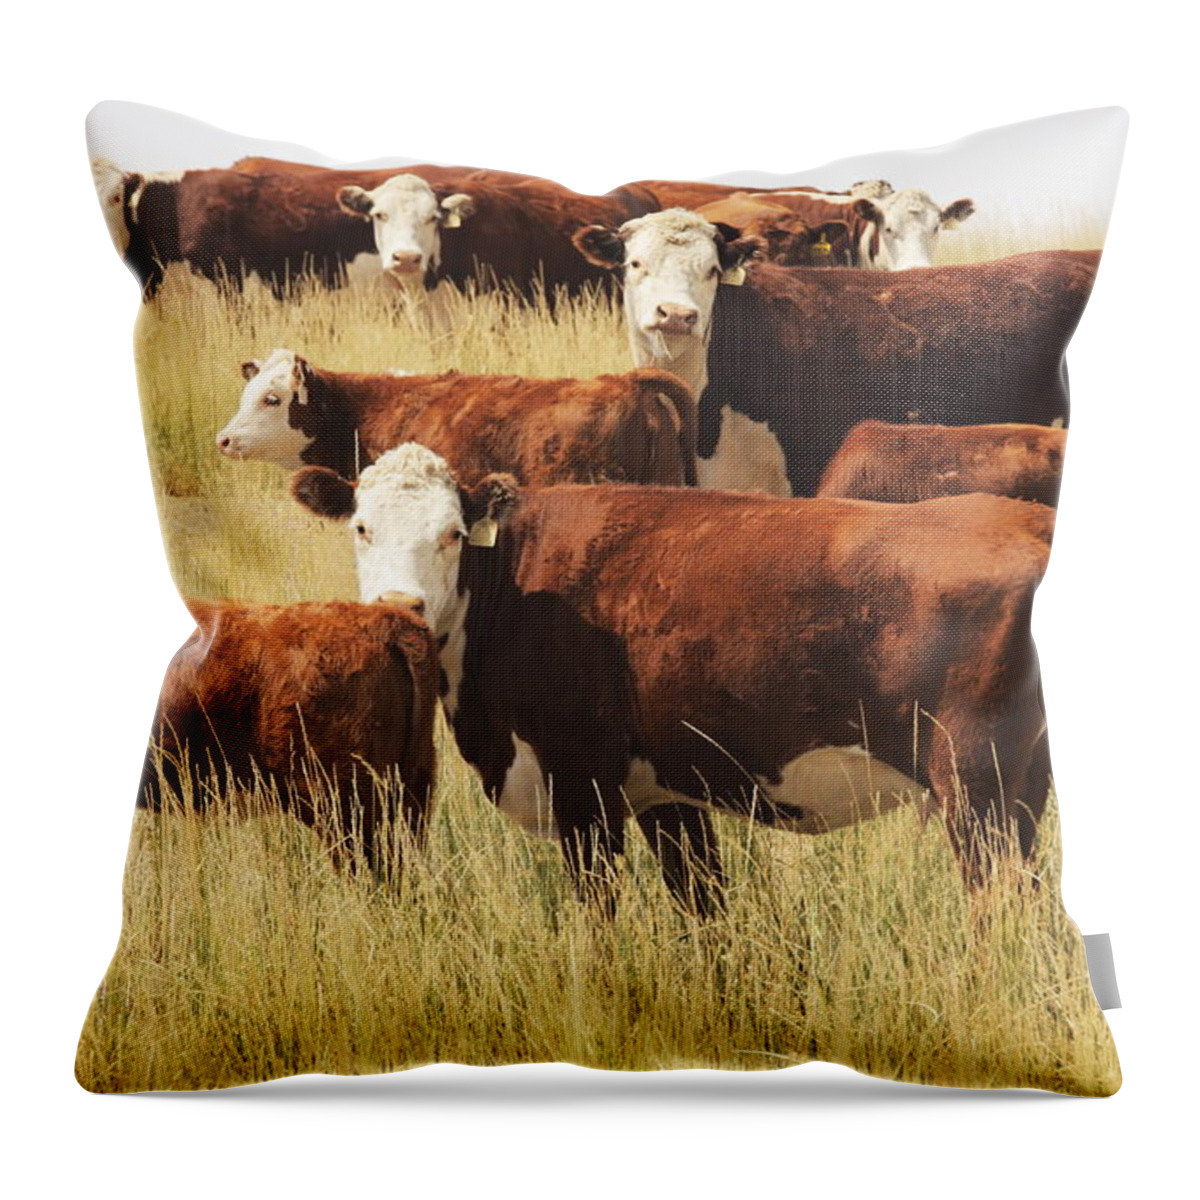 Non-moving Activity Throw Pillow featuring the photograph Hereford Cow Farm Pasture Livestock by Chuckschugphotography